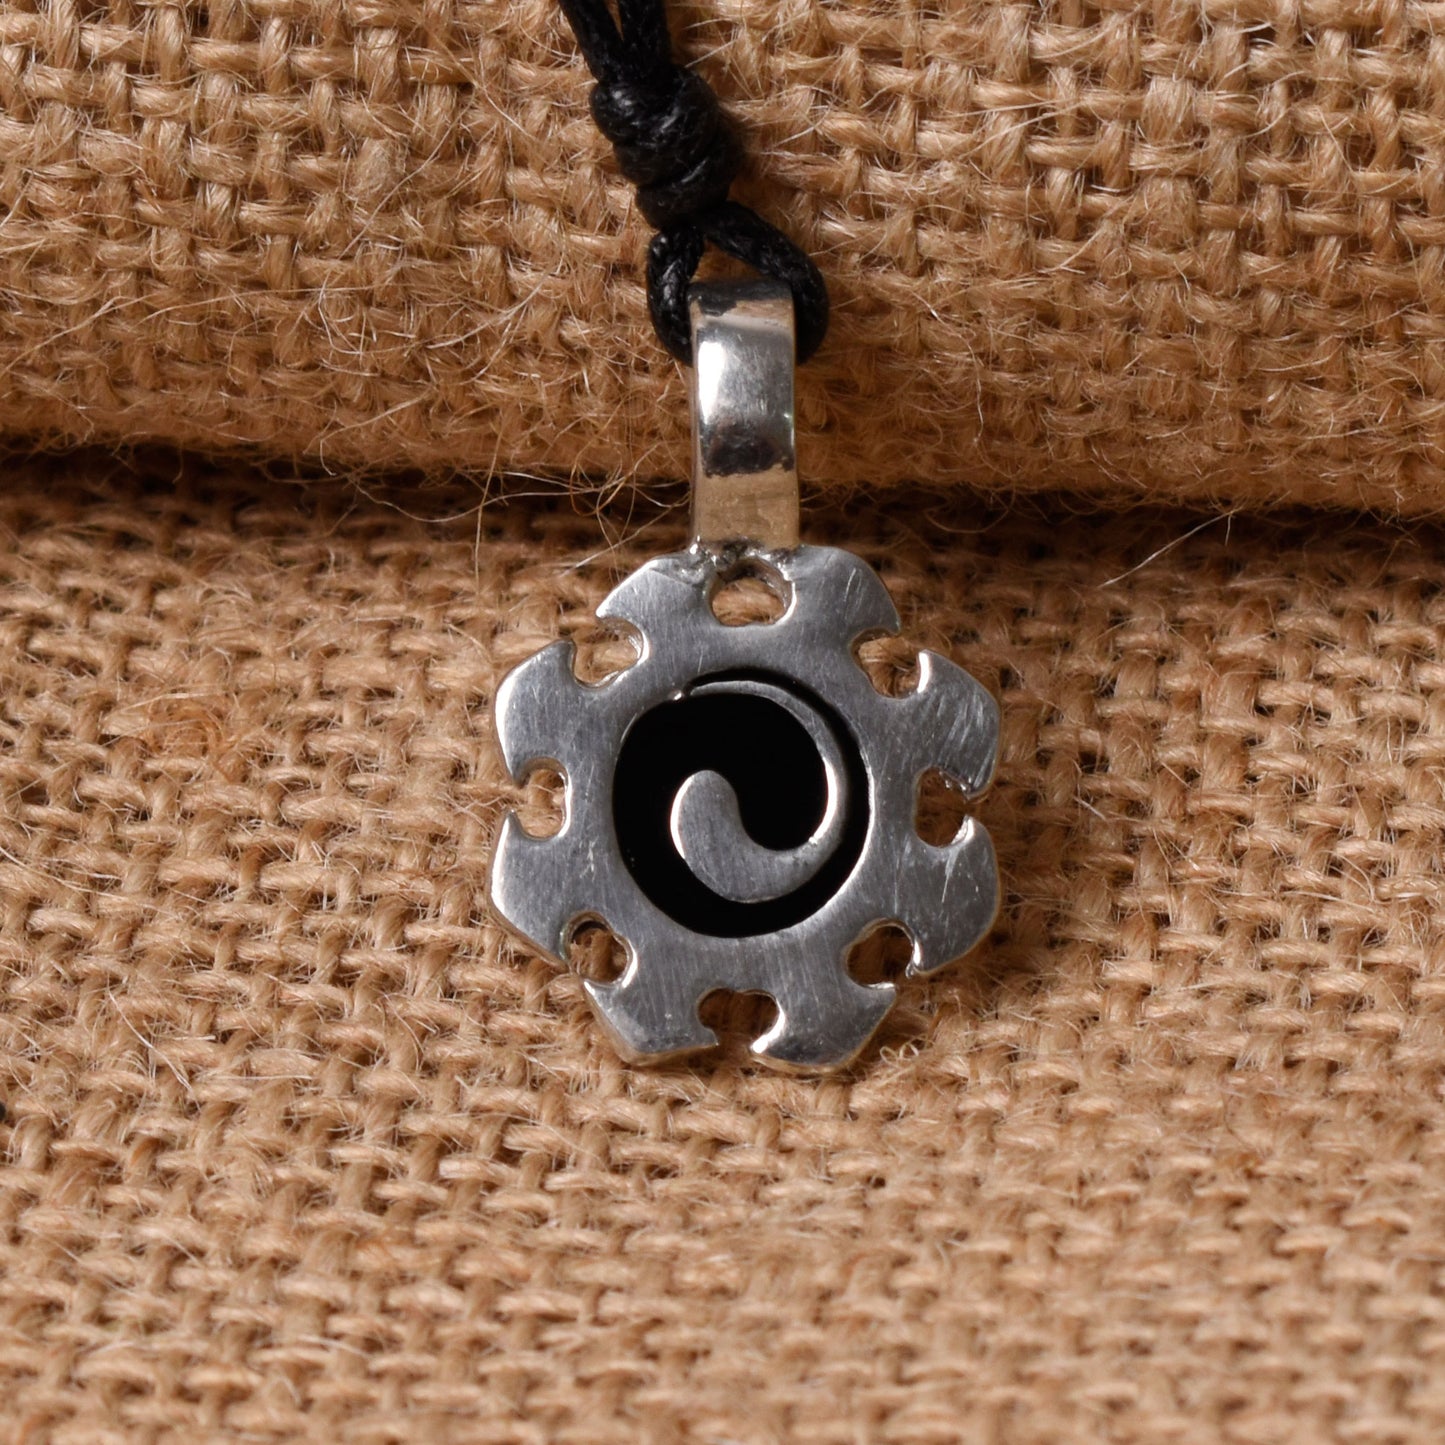 New Ying Yang Silver Pewter Charm Necklace Pendant Jewelry